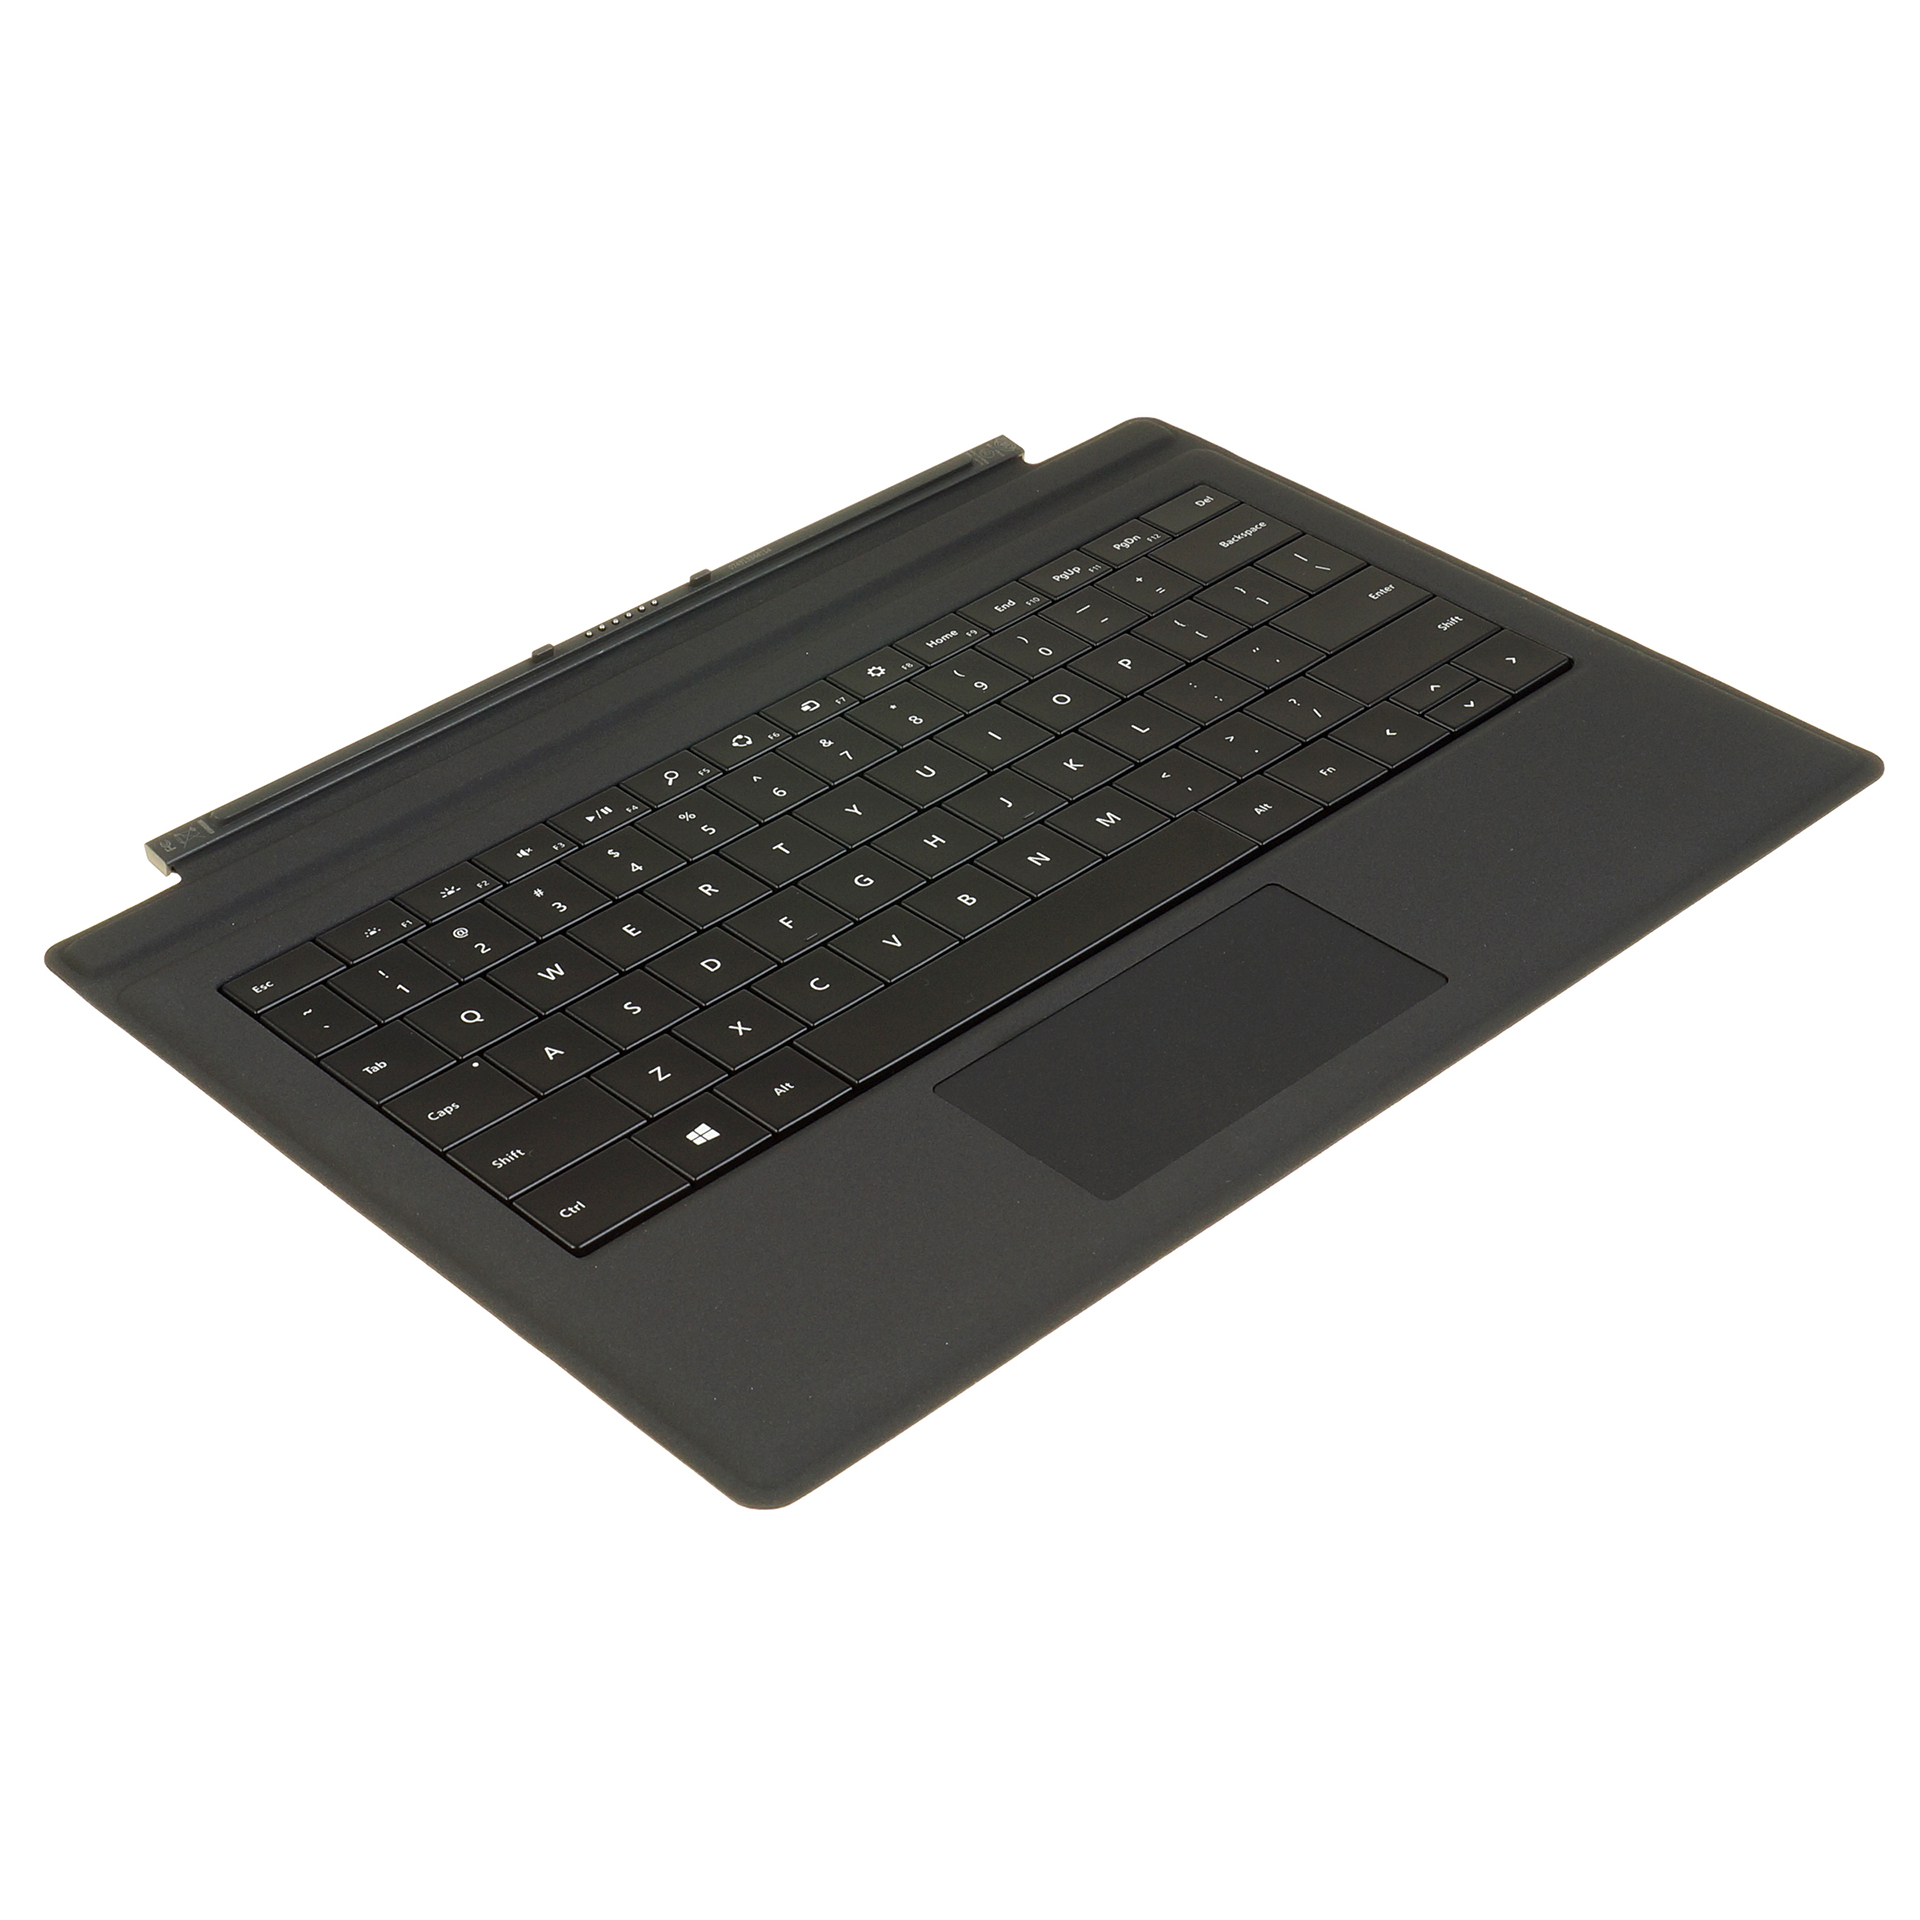 Microsoft Surface Pro 4 Type Cover Mechanical Keyboard R9q 00001